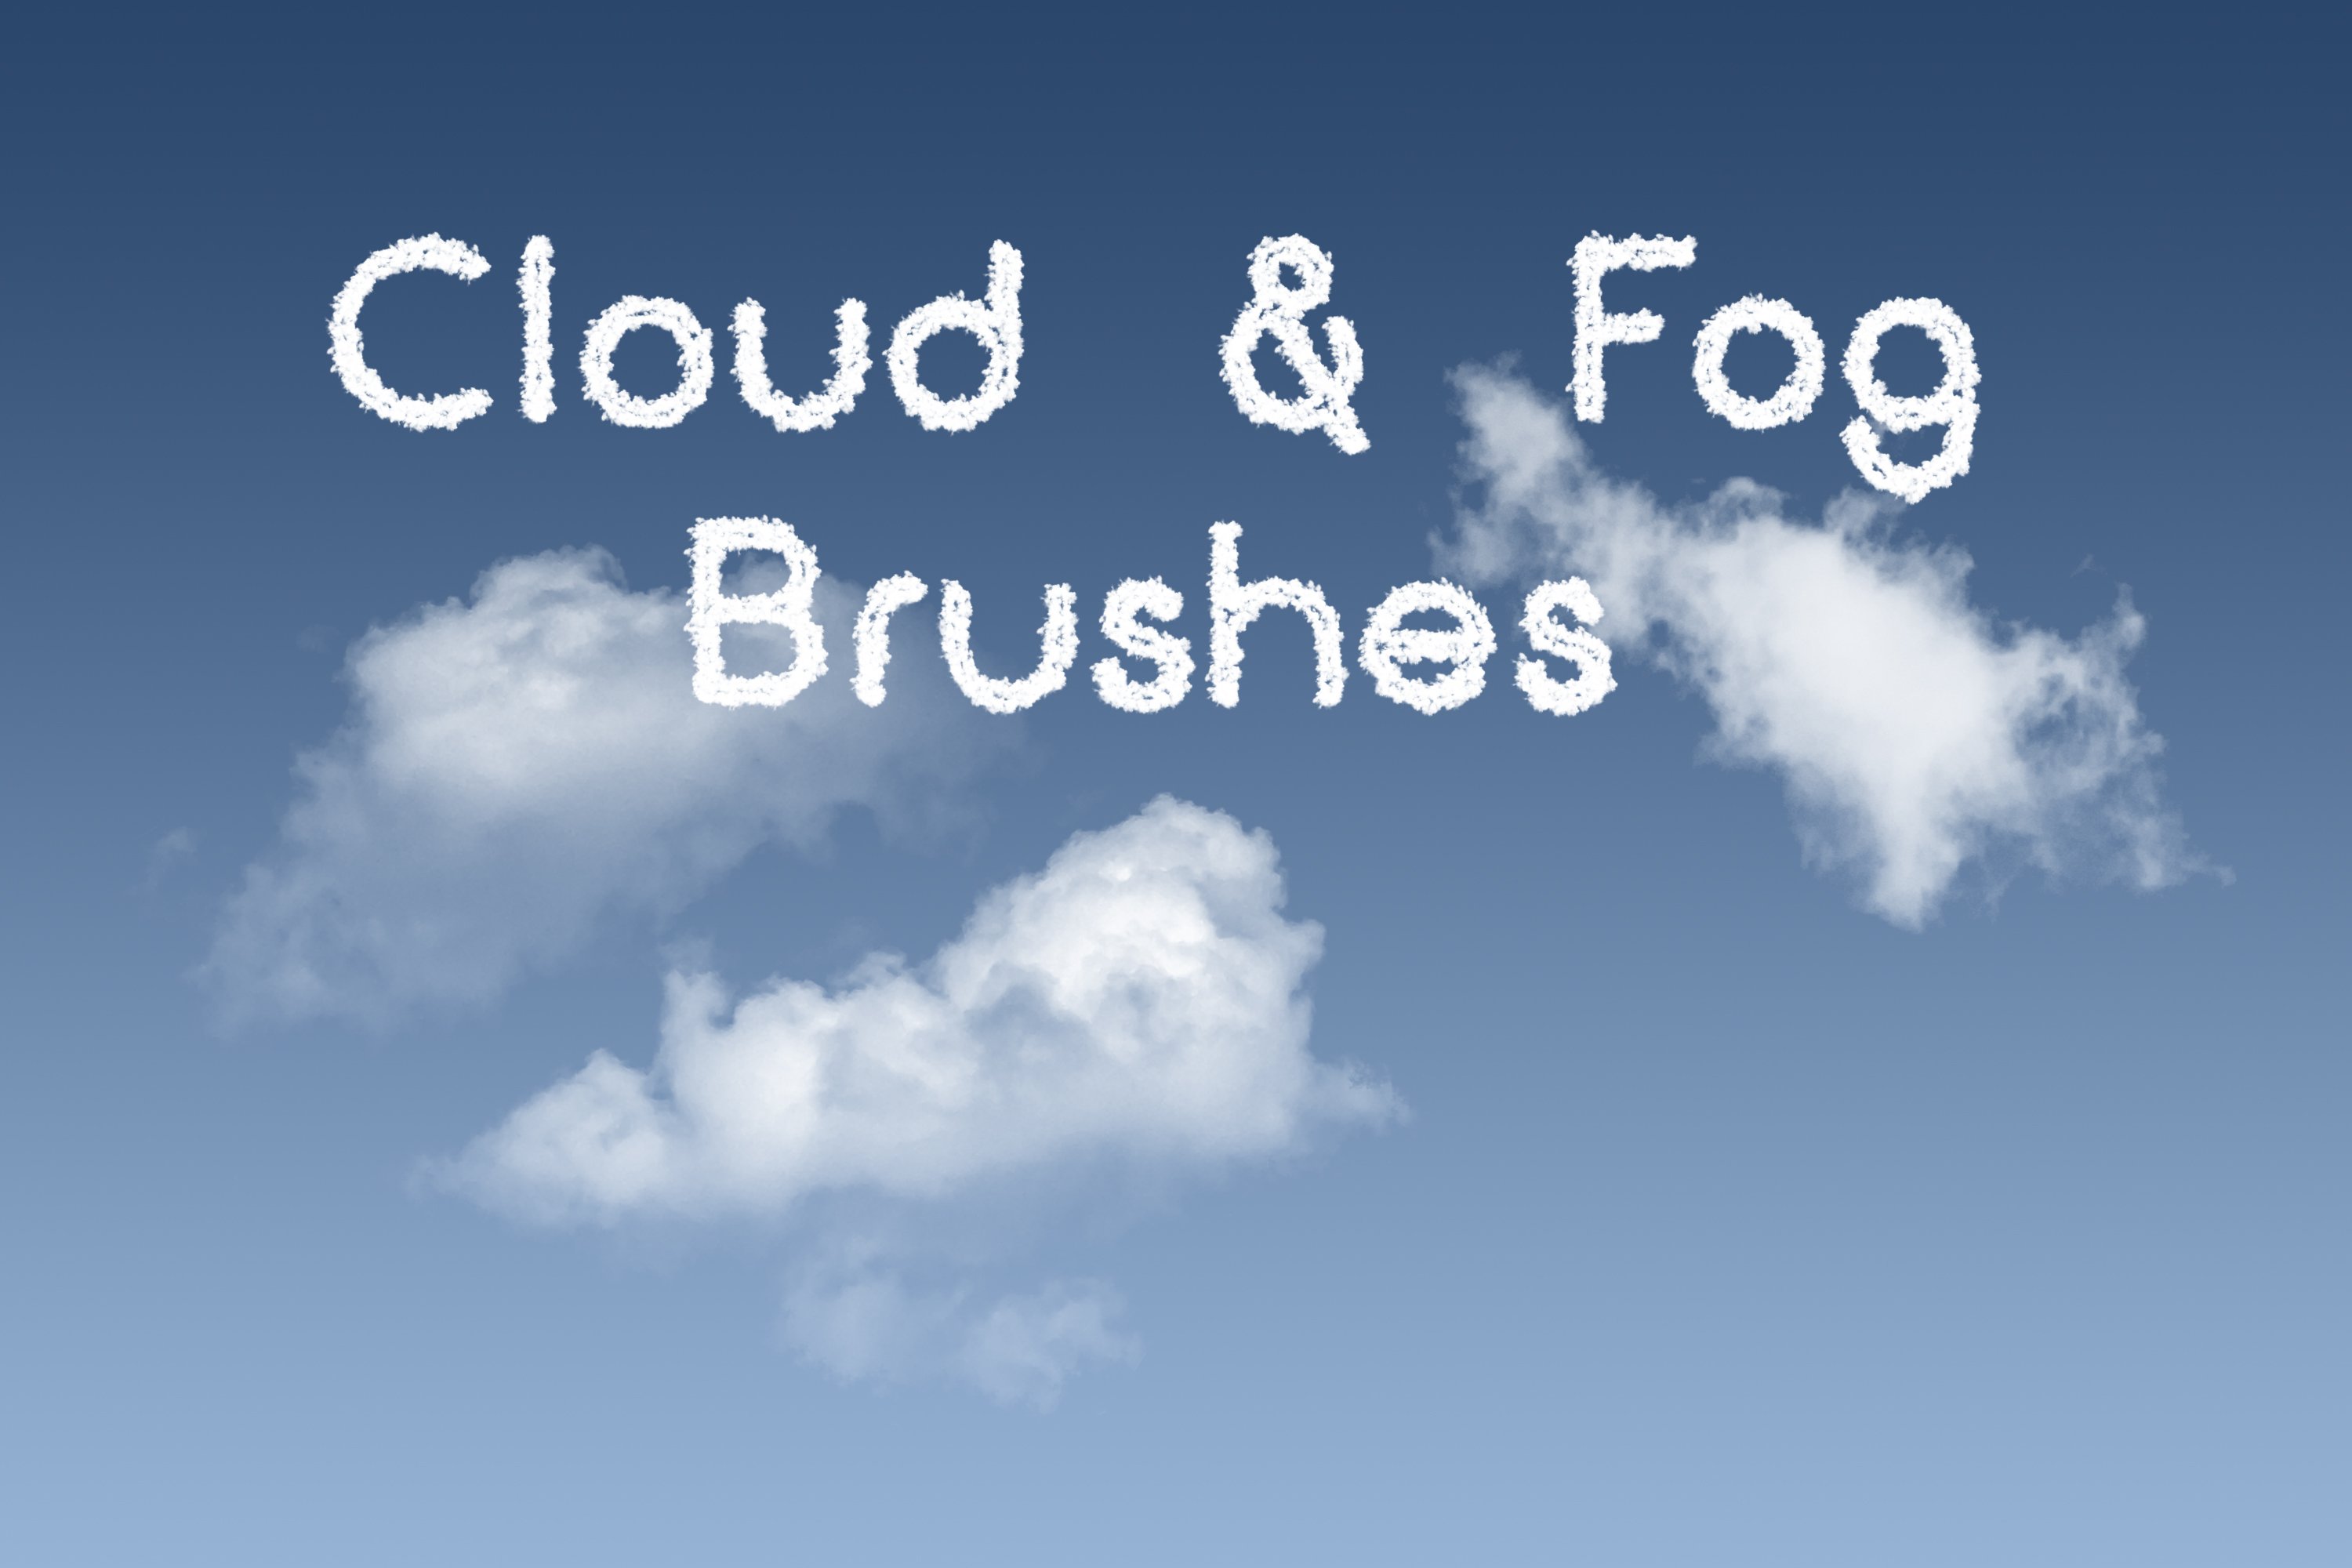 40 Cloud and Fog and Mist Brushescover image.